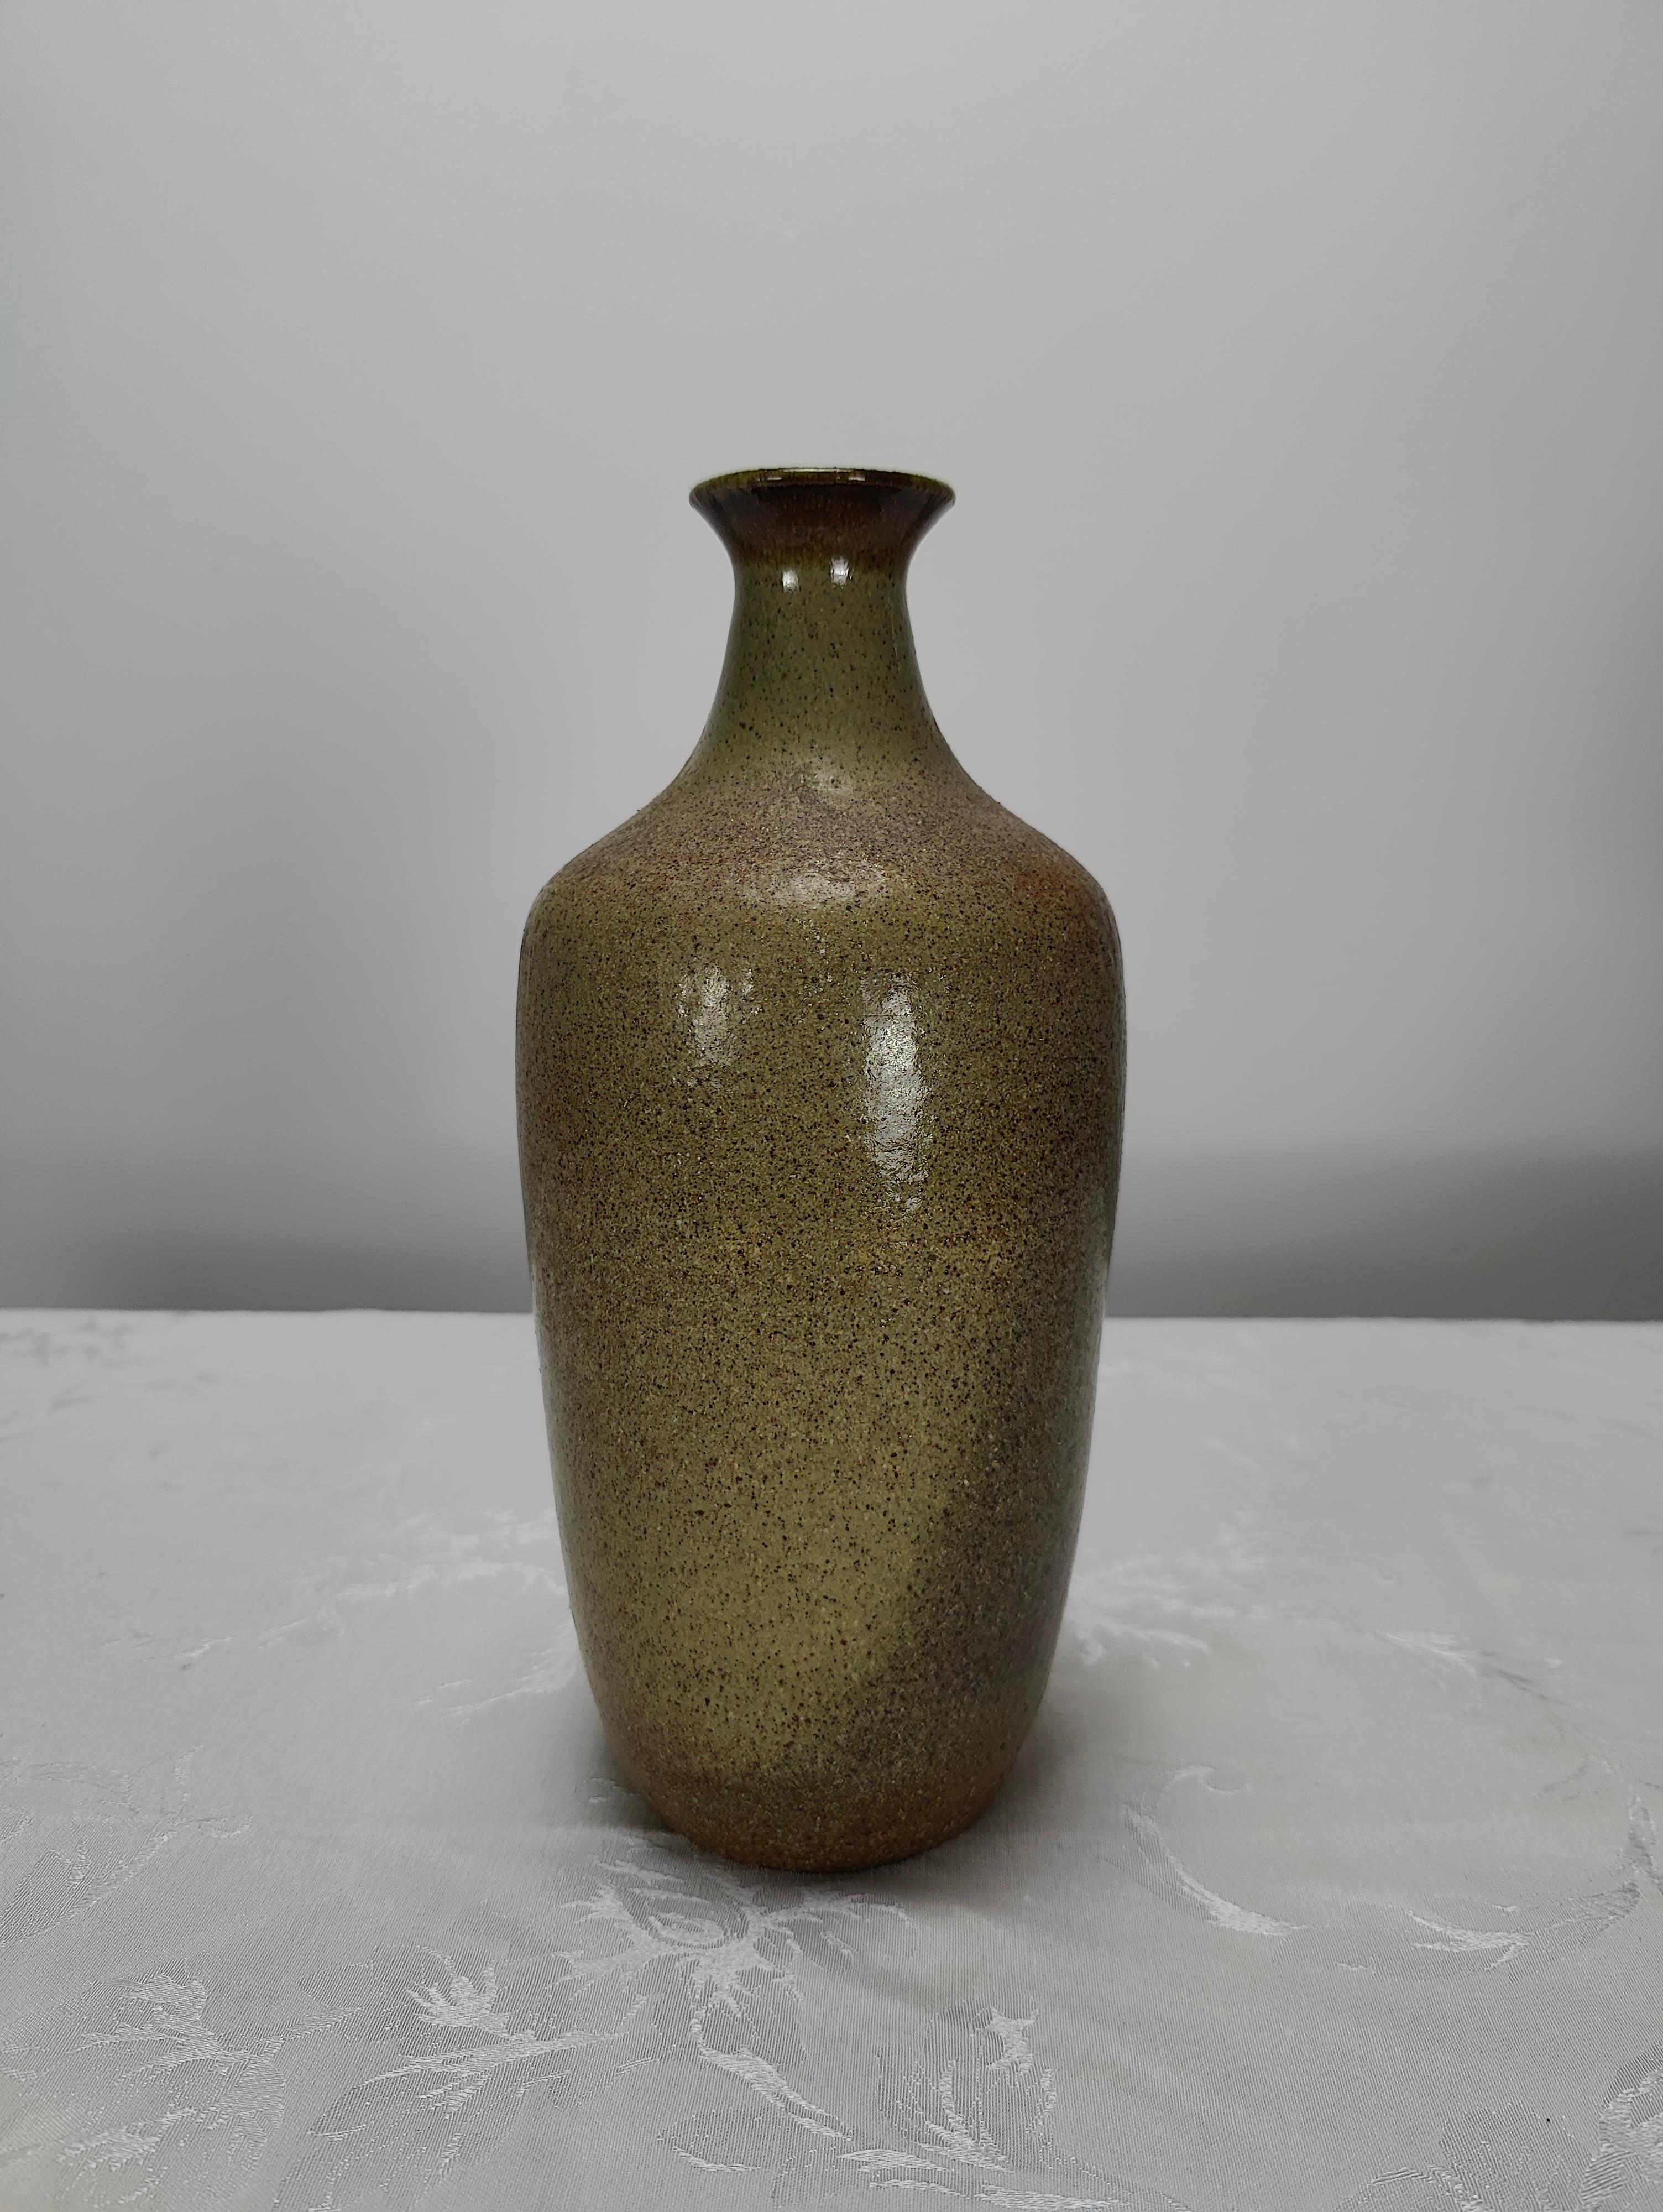 Great condition; measures approximately 10.5 inches tall x 5 inches at widest part. Perfect for any midcentury styled home. By ceramist, Maxine Scholts. If you have any questions, please feel free to reach out.